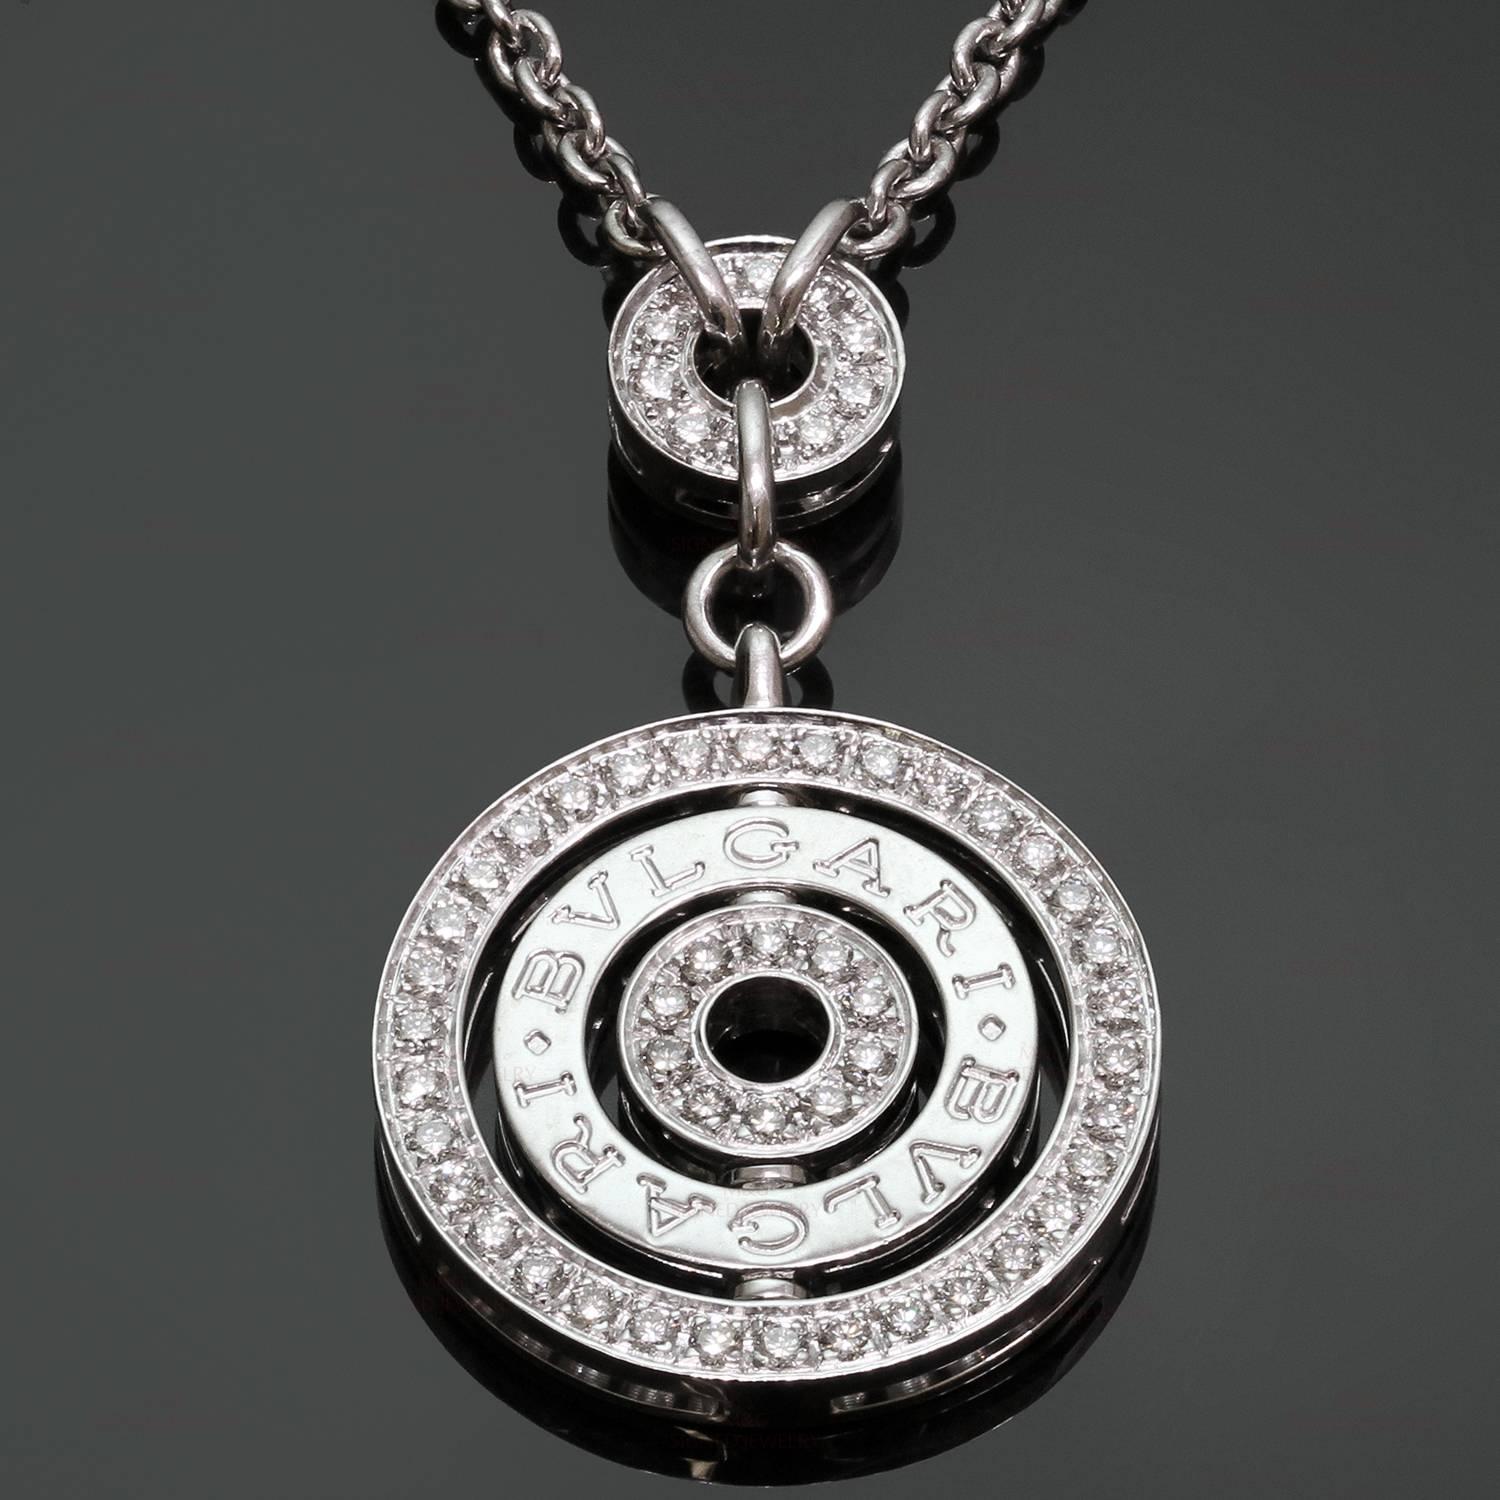 This fabulous Bulgari necklace from the Cerchi collection is crafted in 18k white gold and completed with a circular pendant engraved with the Bvlgari name and set with 56 round brilliant-cut diamonds of an estimated 0.80 carats. The chain has an